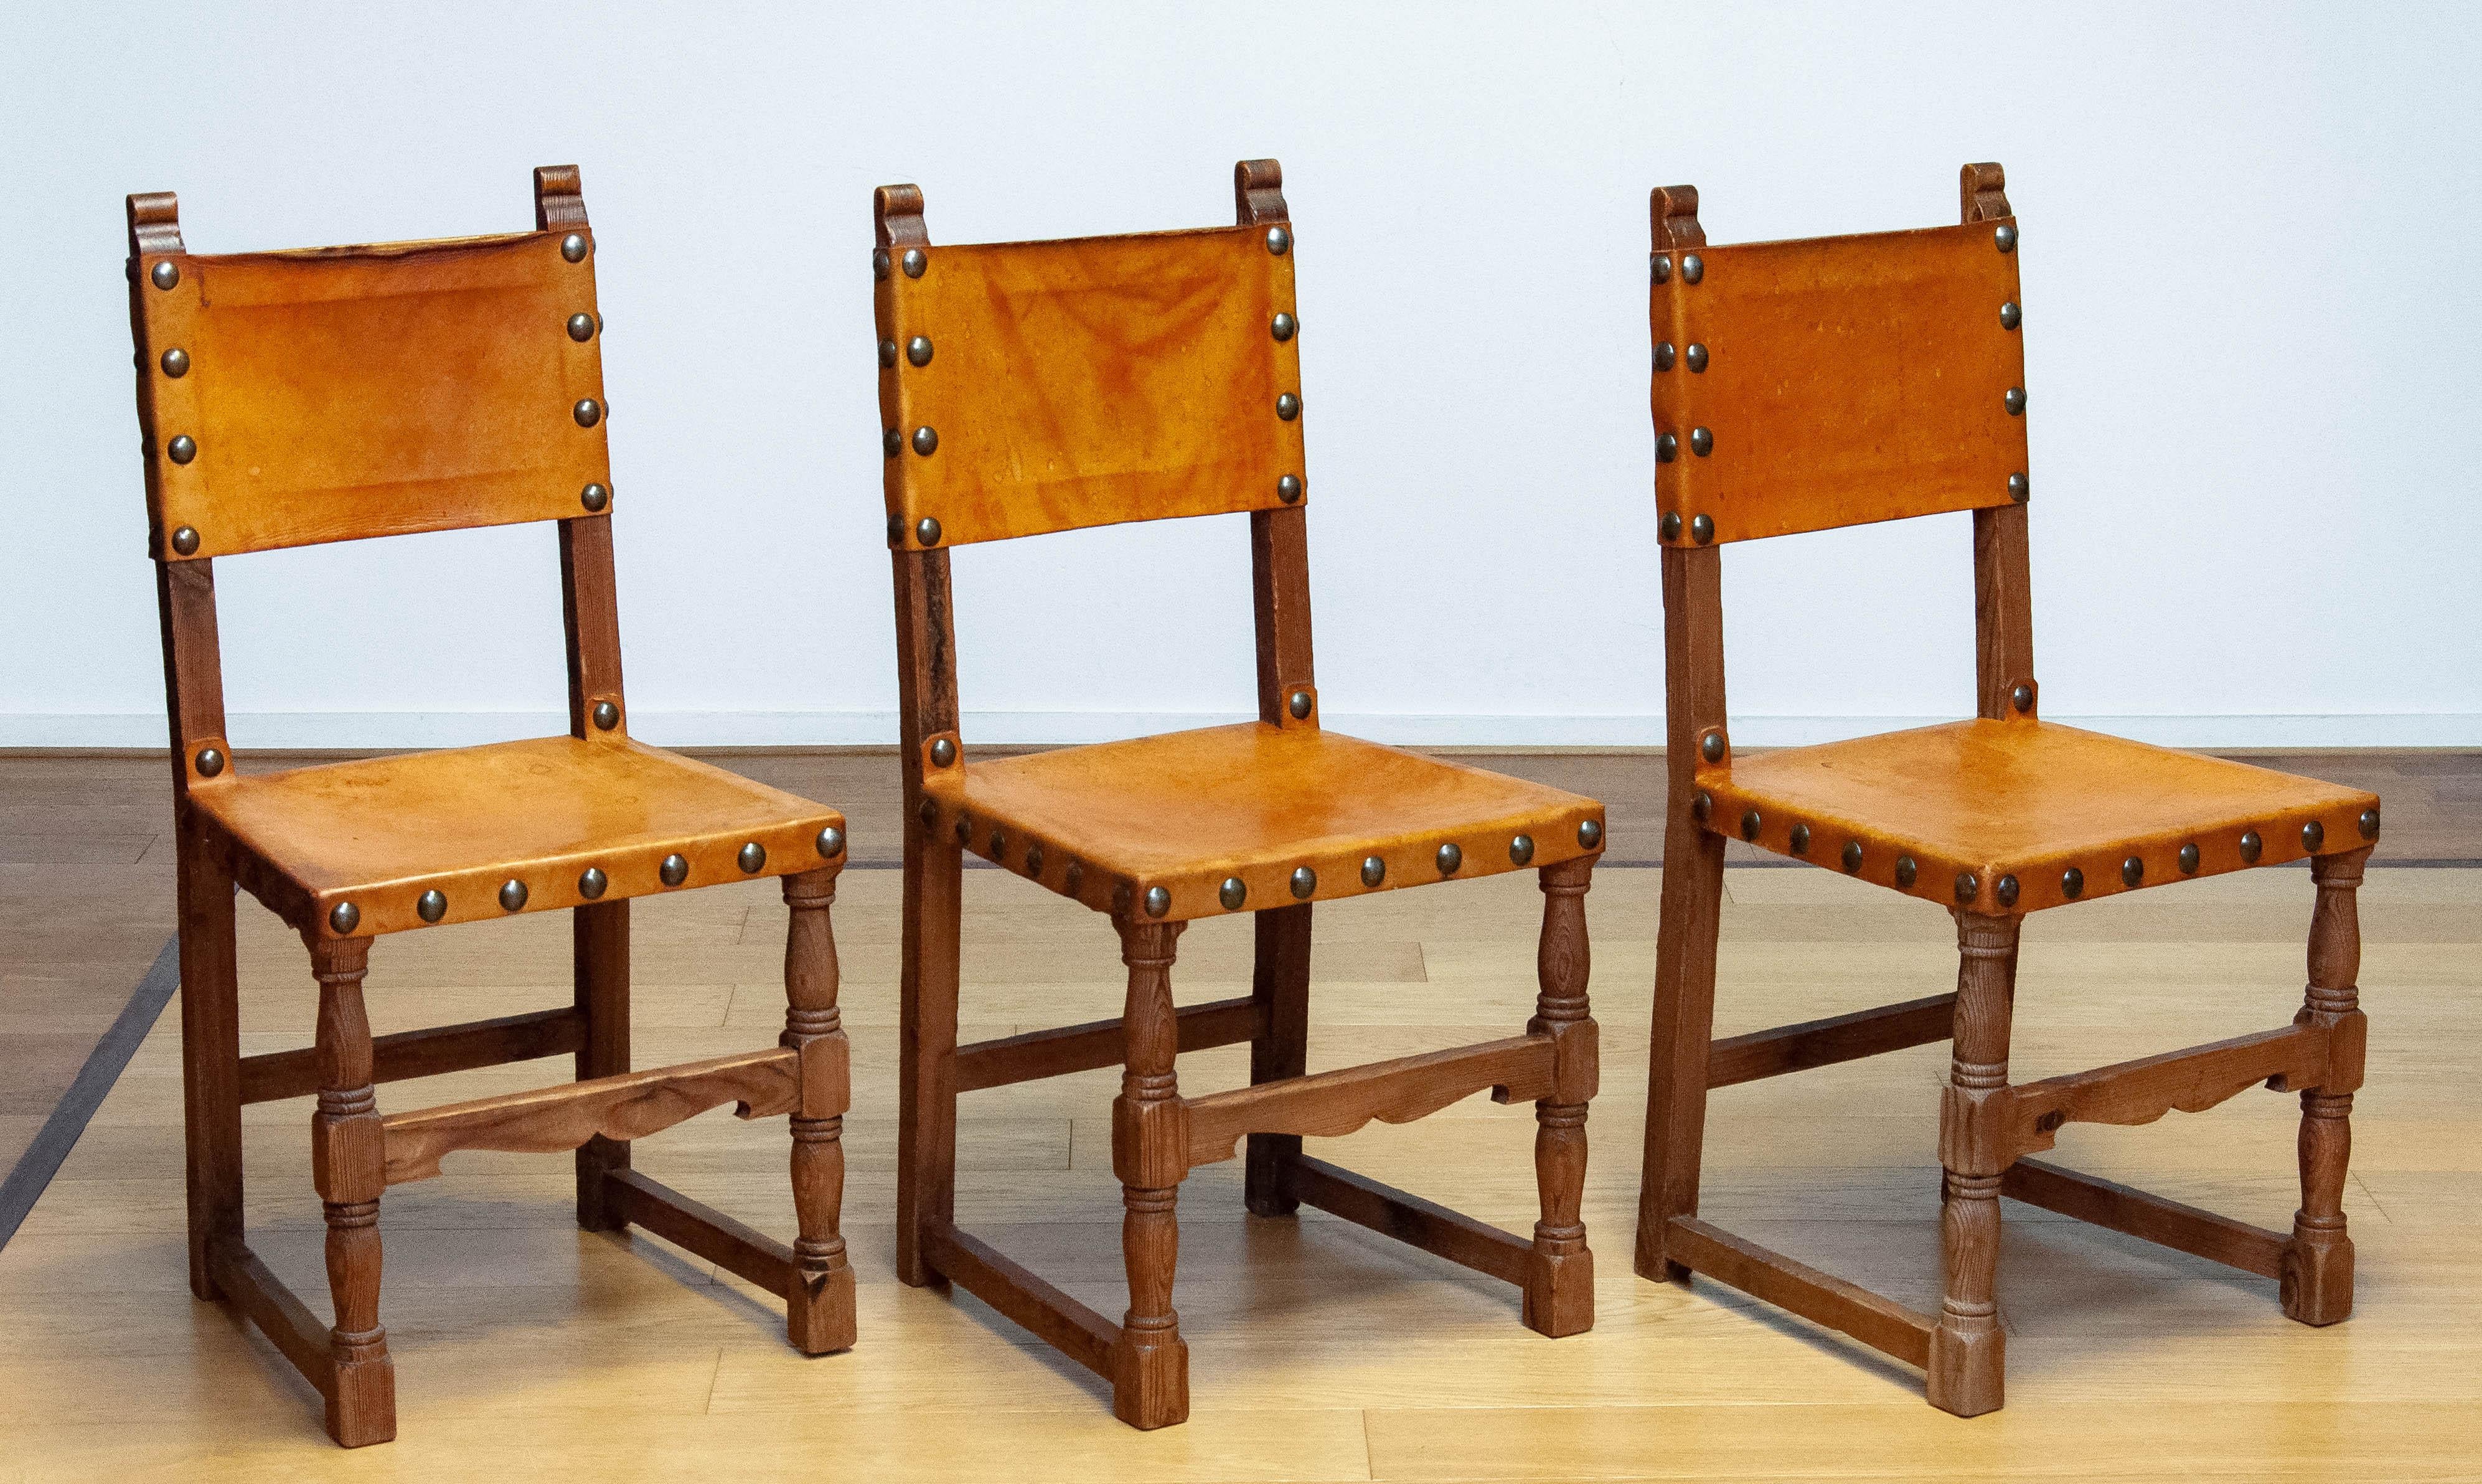 6 Antique Swedish Folk Art Farm County Dining Chairs In Pine And Tan Leather For Sale 9